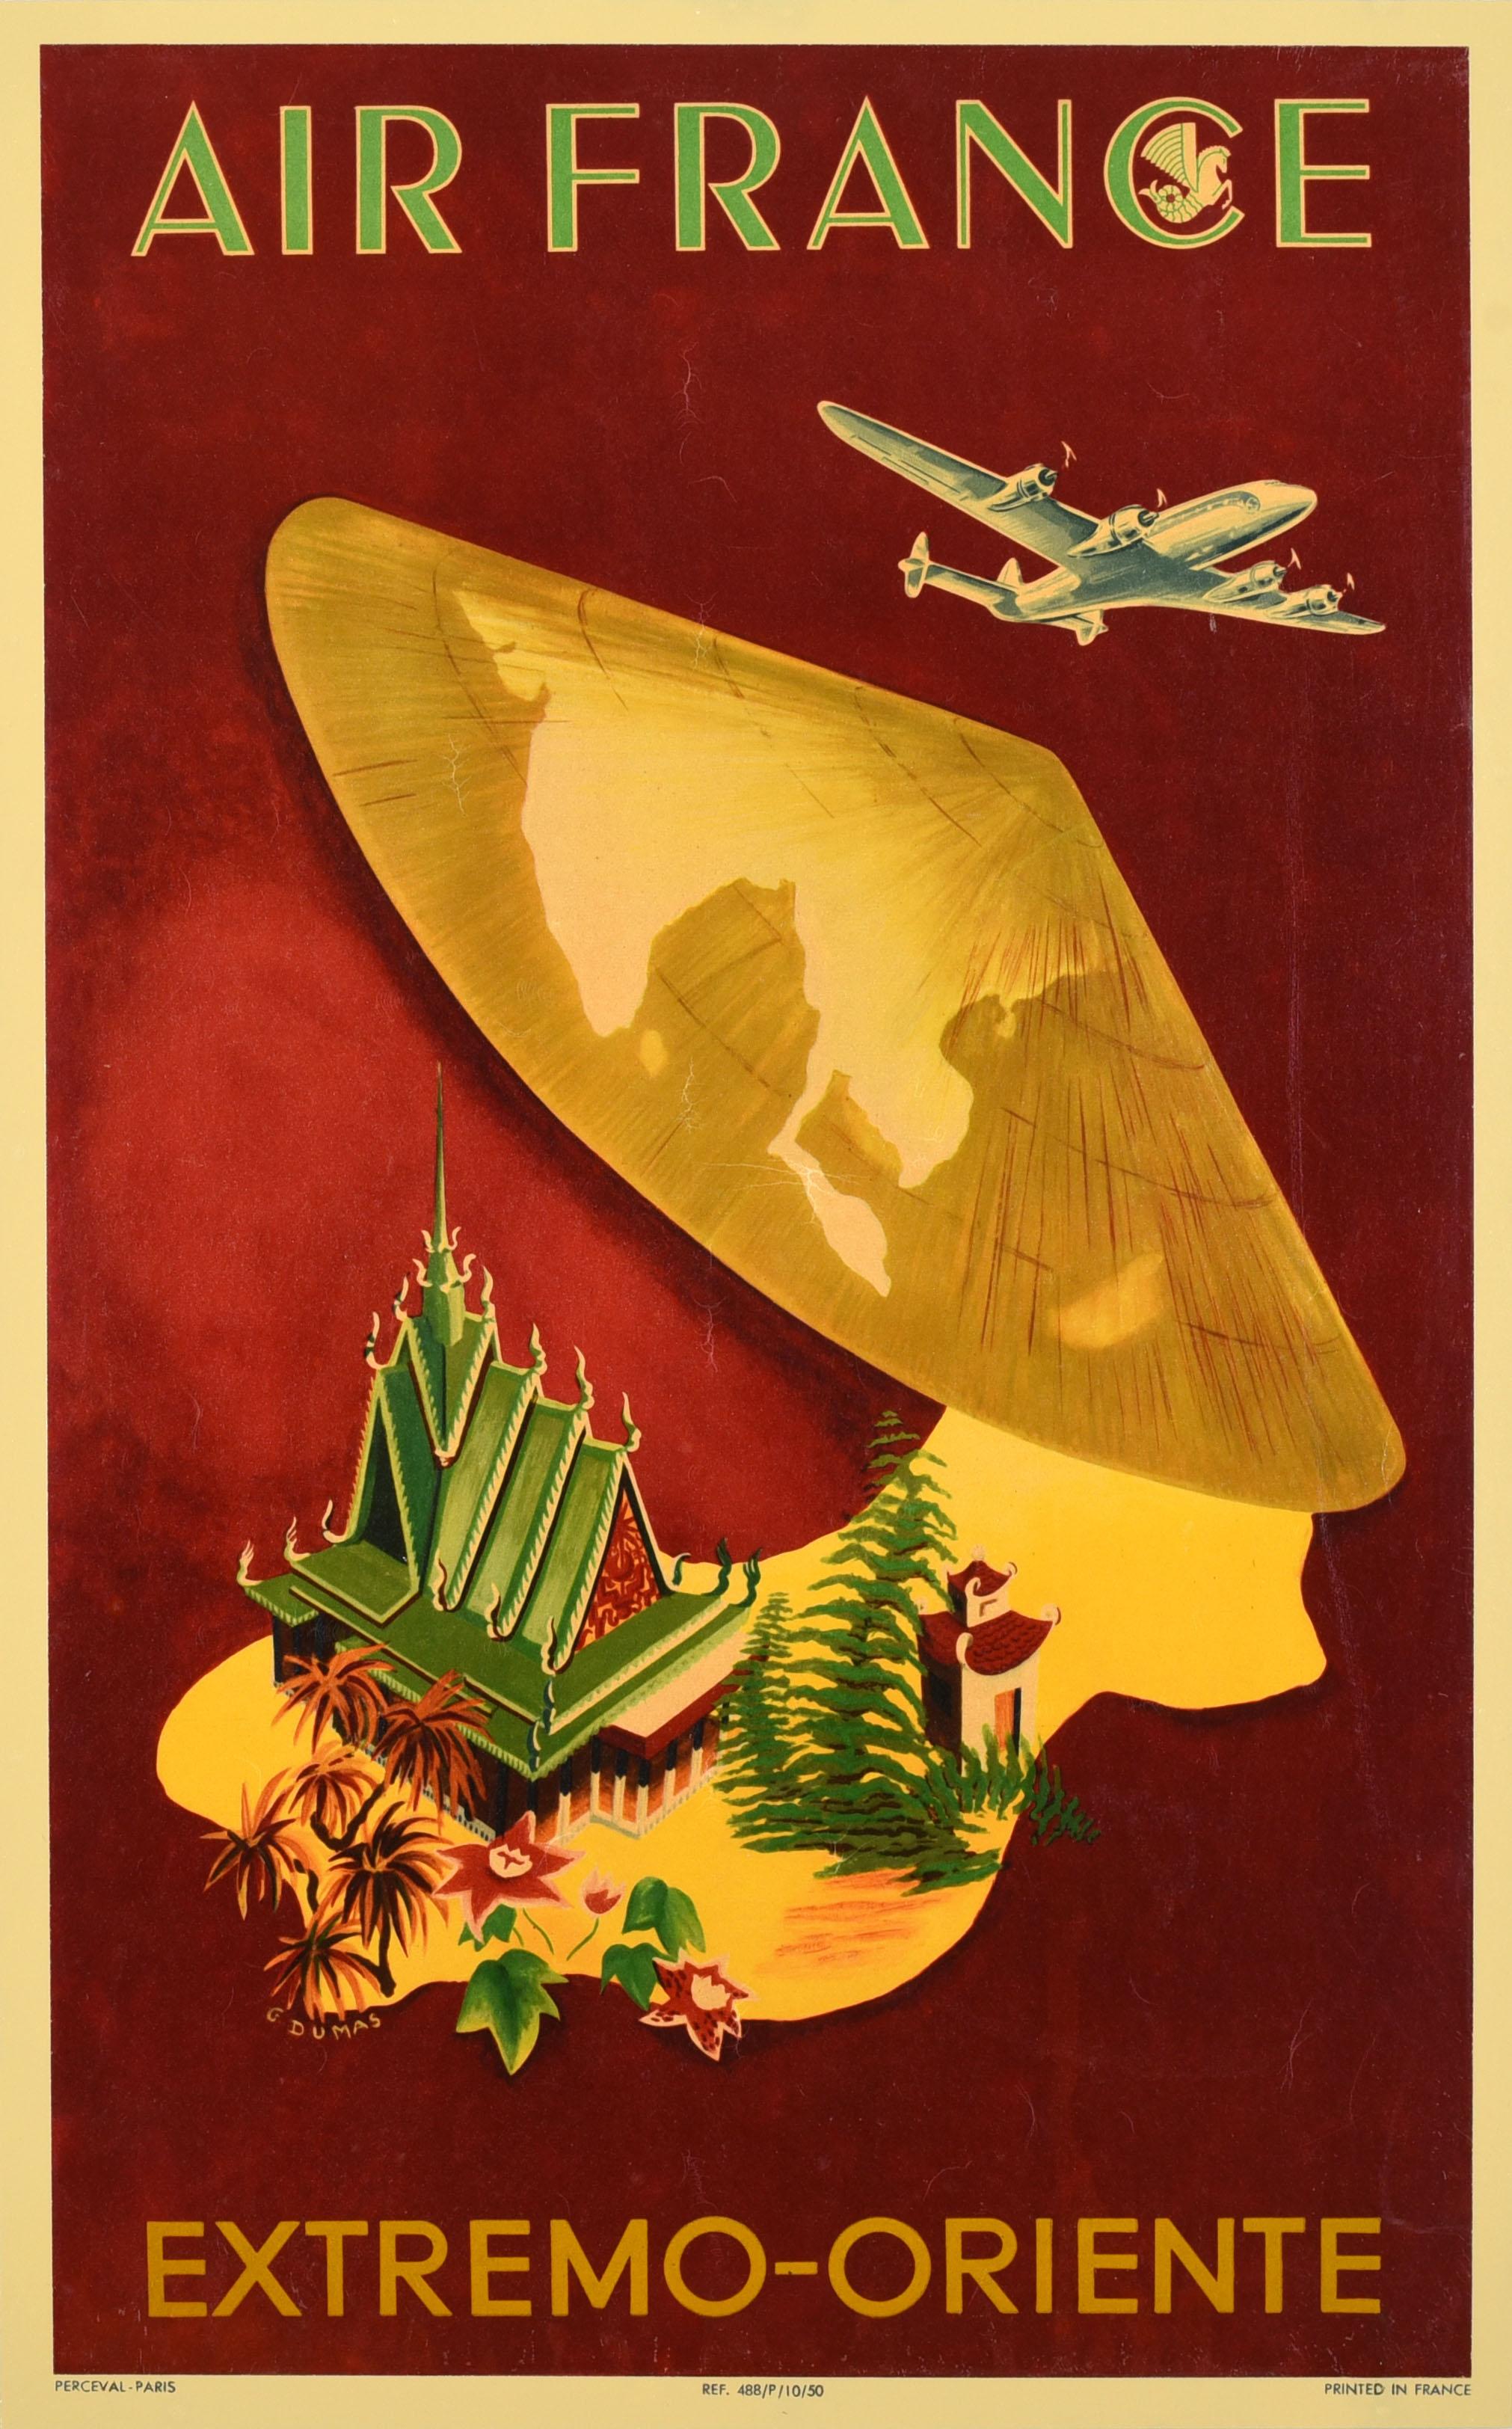 Unknown Print - Original Vintage Travel Poster Air France Airline Extremo Oriente Far East Asia